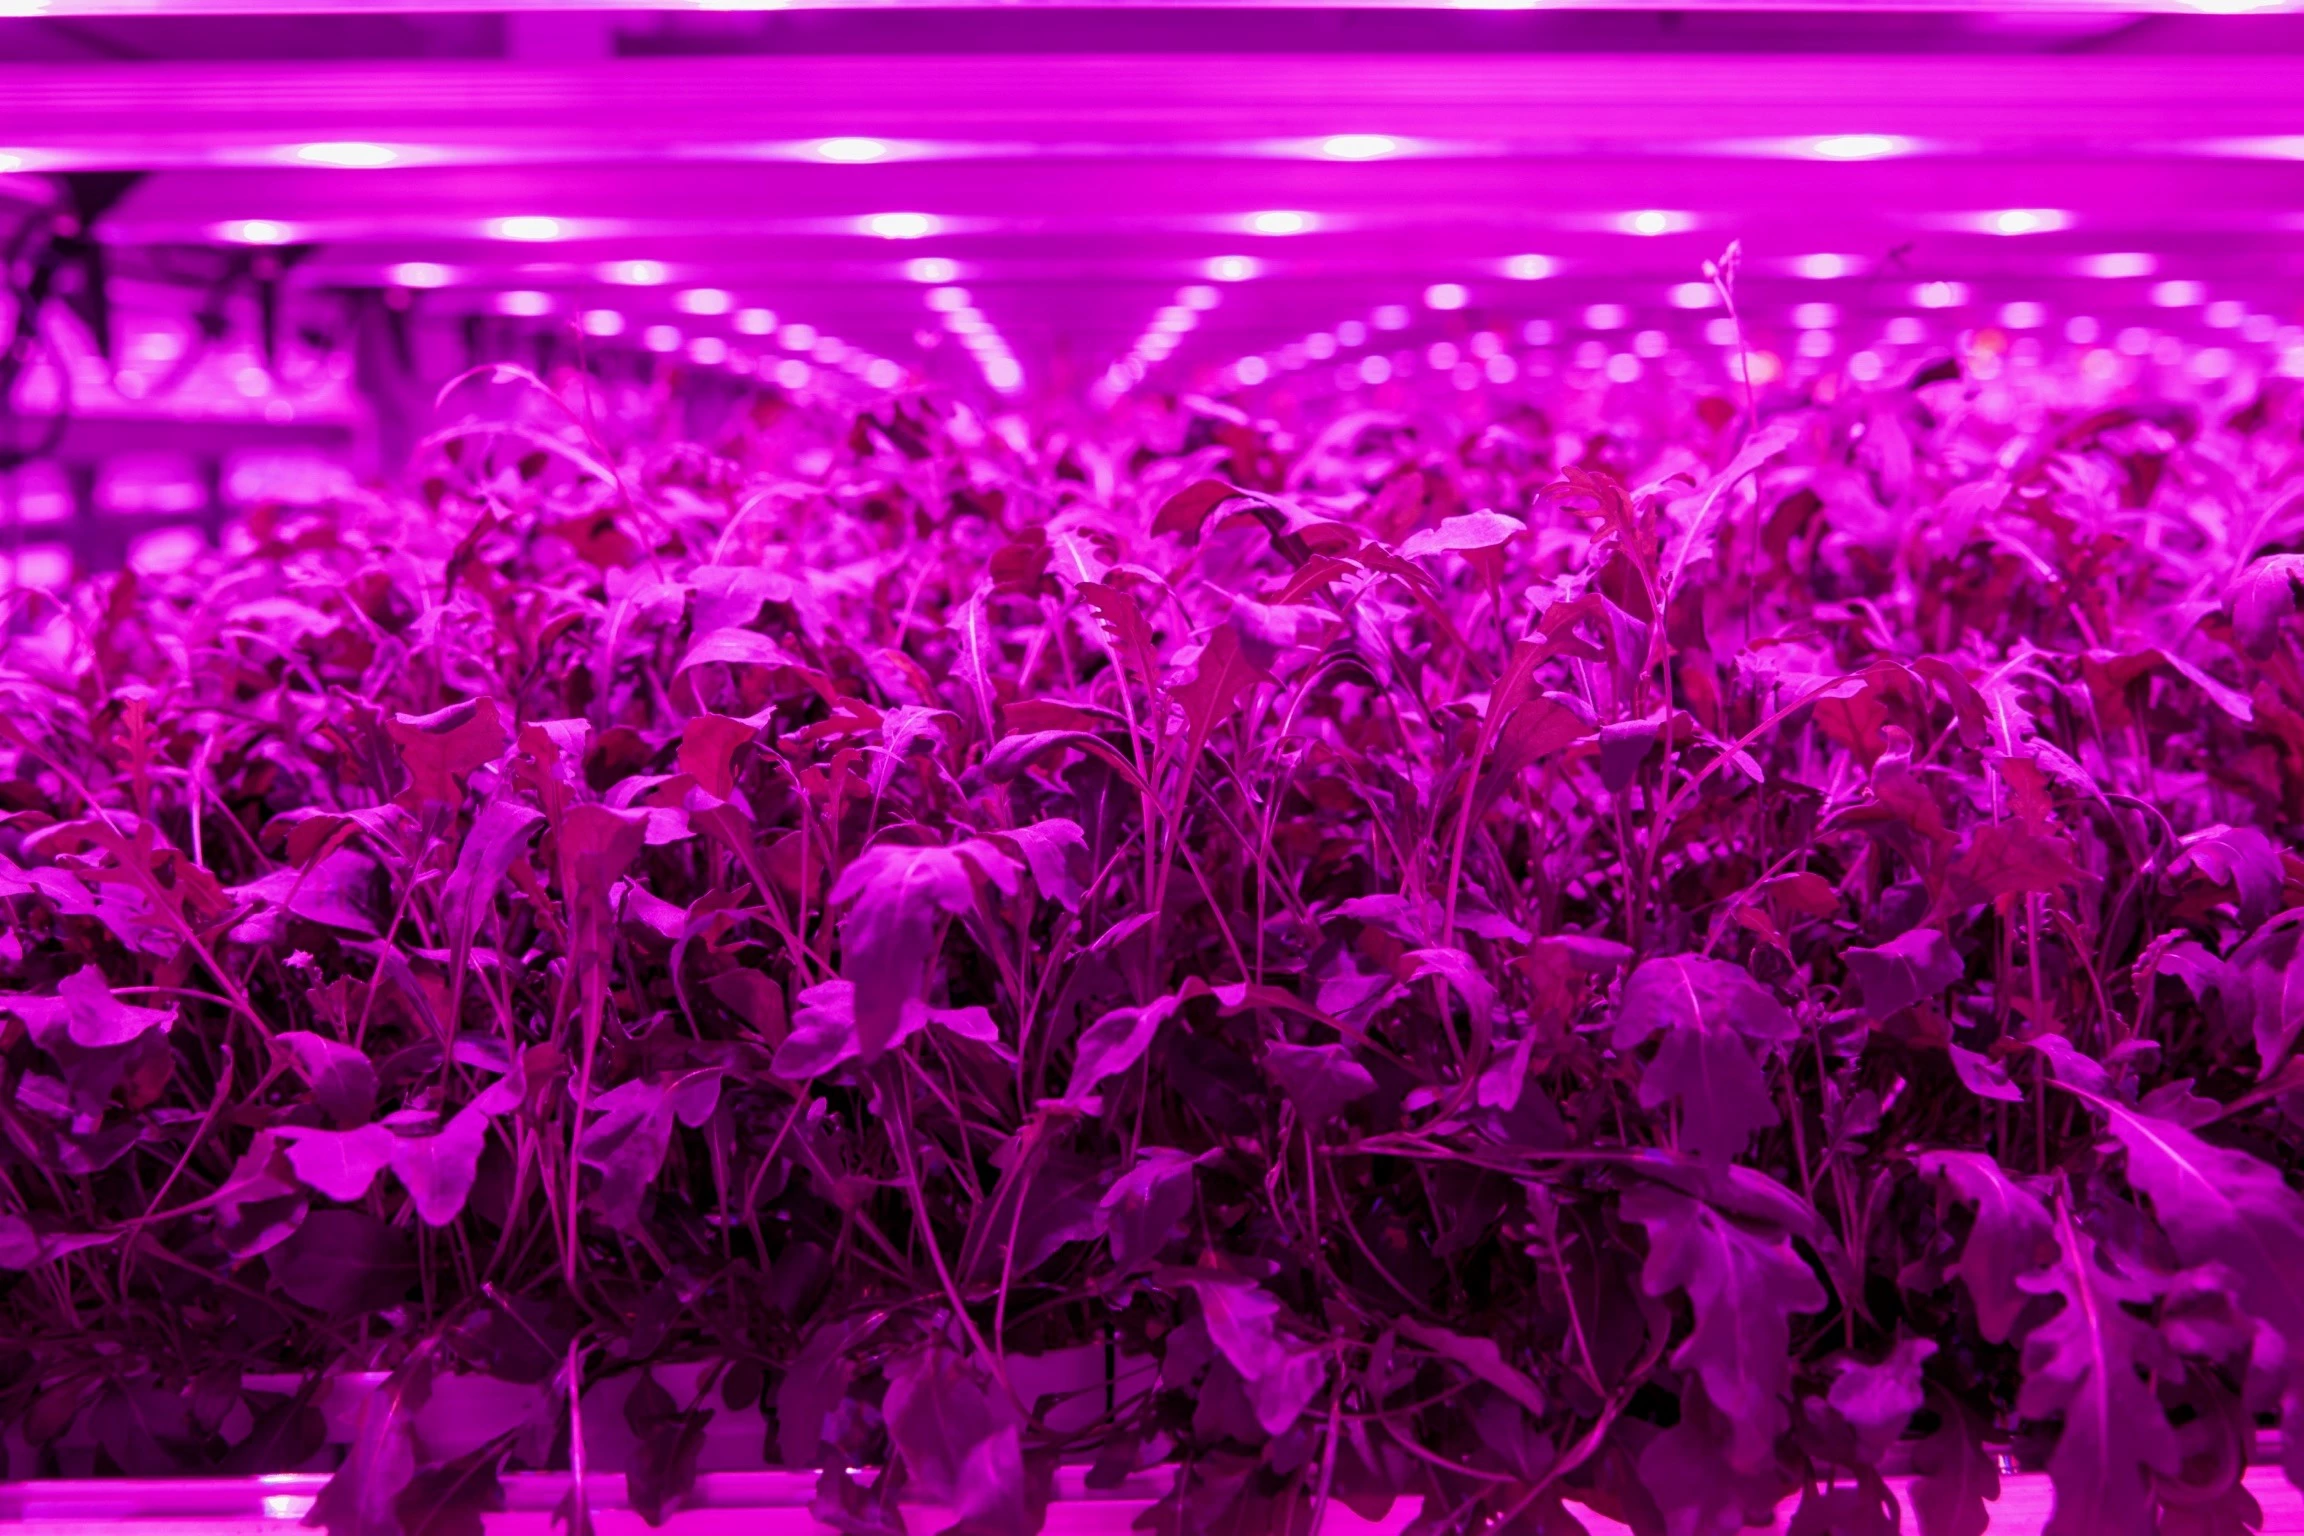 2021 marked the beginning of the AgriTech boom (image shows a vertical farm)